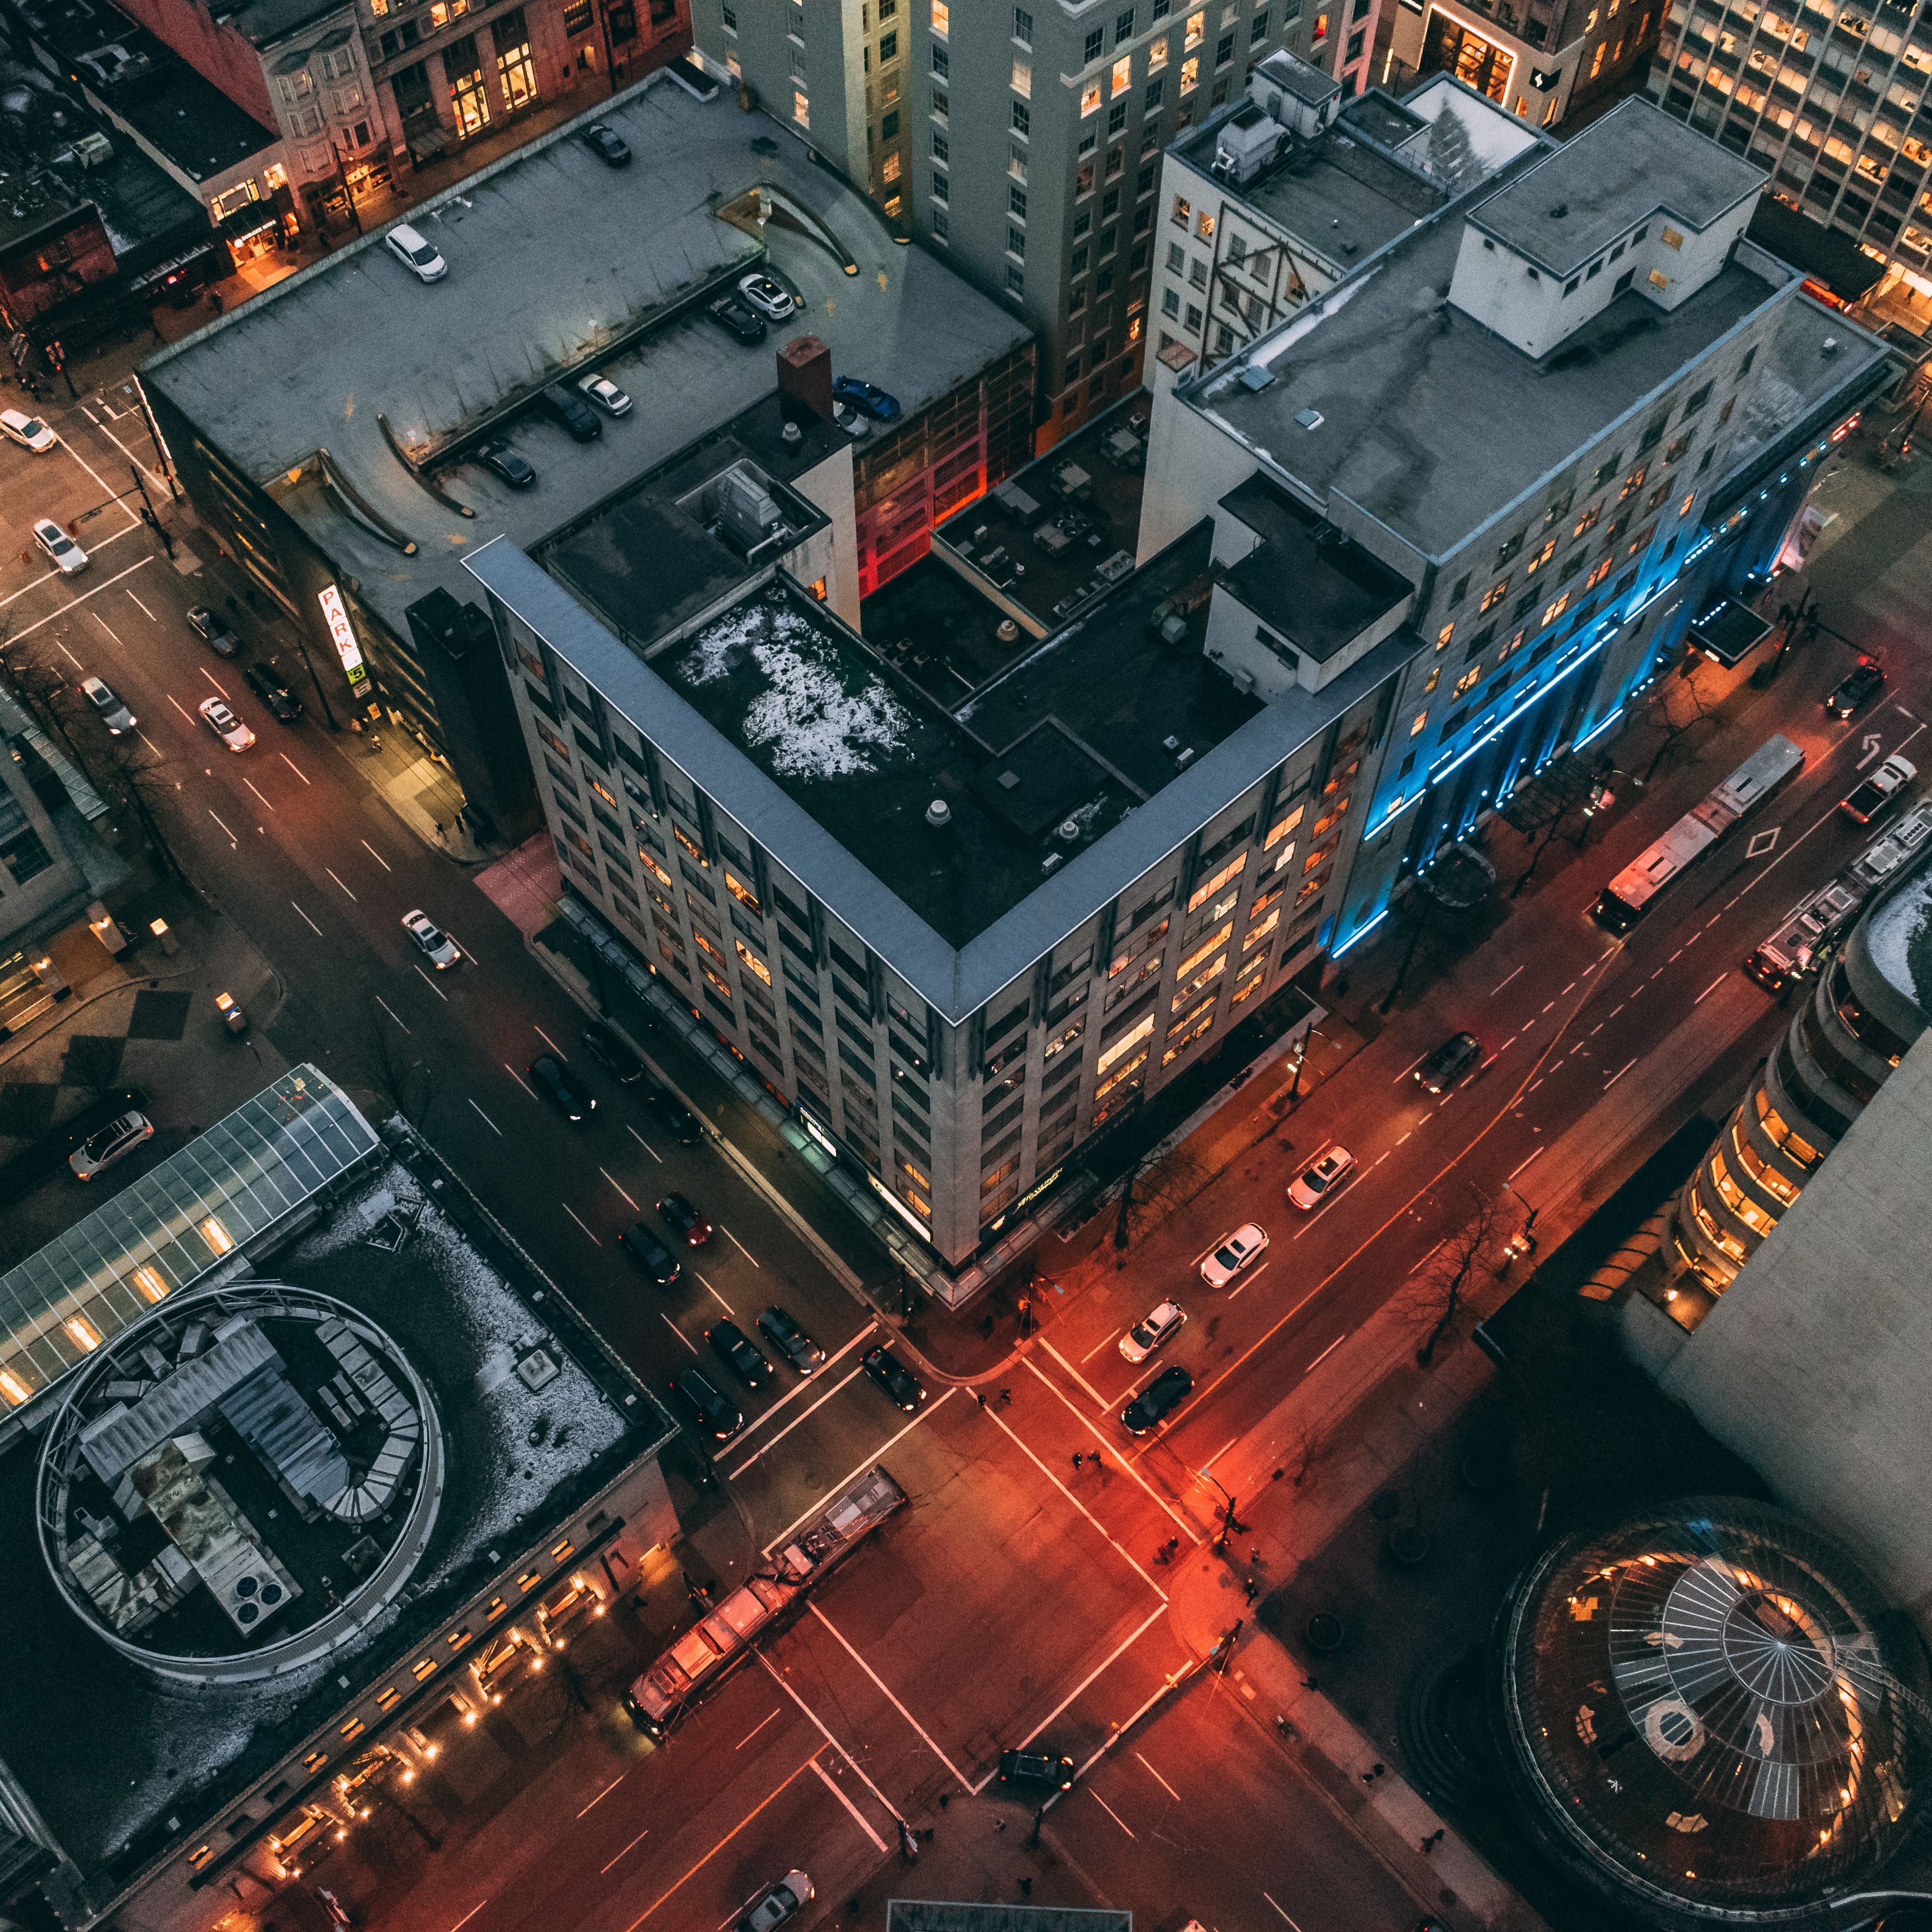 Download wallpaper 3415x3415 buildings, city, building, top view ipad pro 12.9 retina for parallax HD background